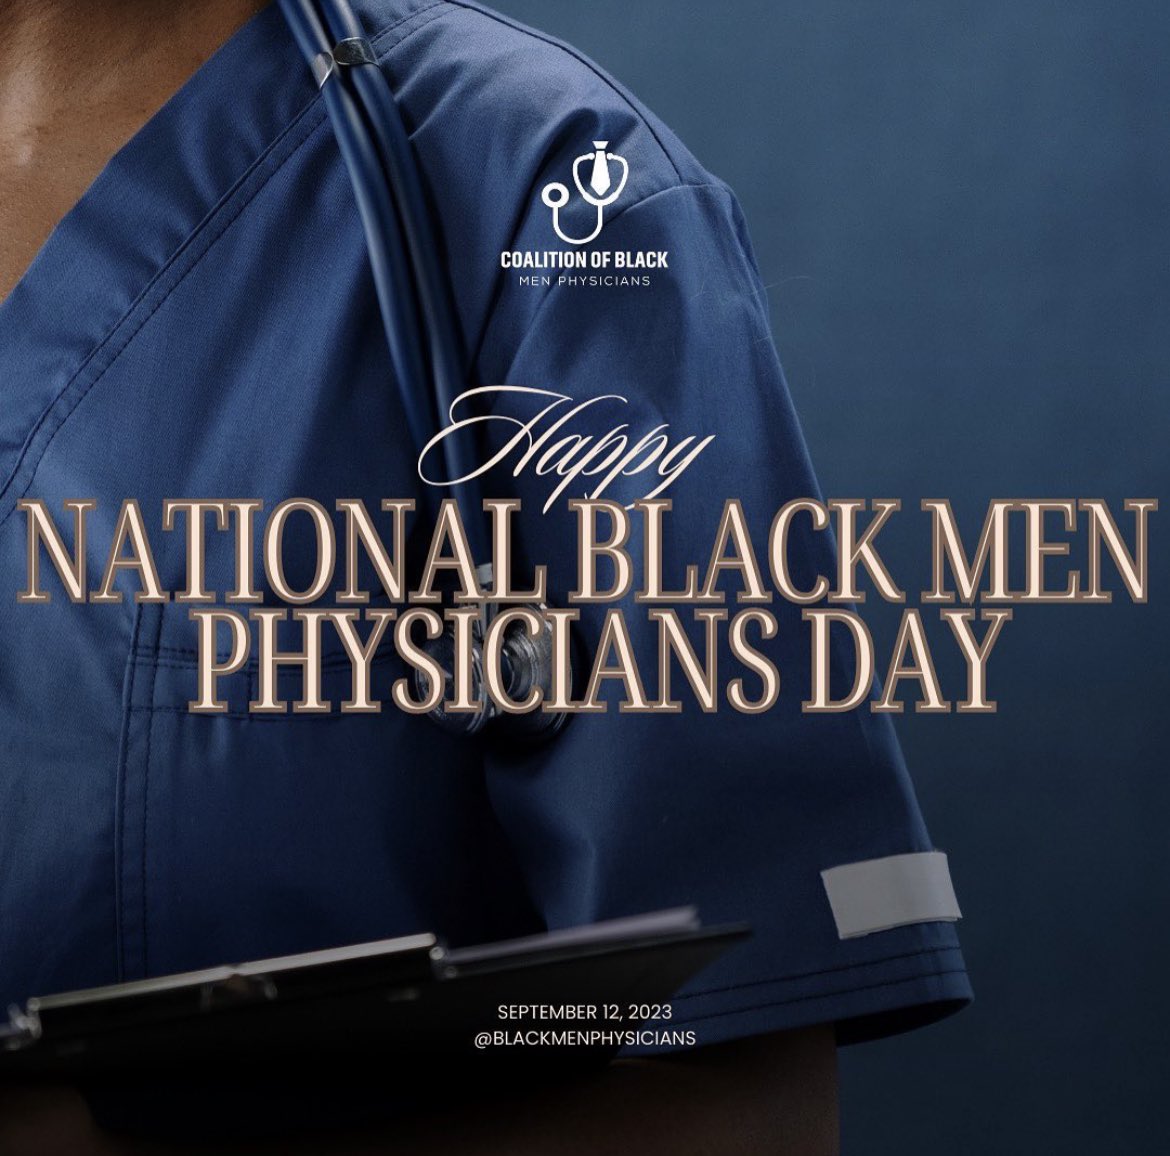 Black male physicians in 1940: 2.7% Black male physicians in 2018: 2.6% So this MD is more than just letters😌. Shout out to the many amazing black male doctors/friends that are changing the face of medicine.